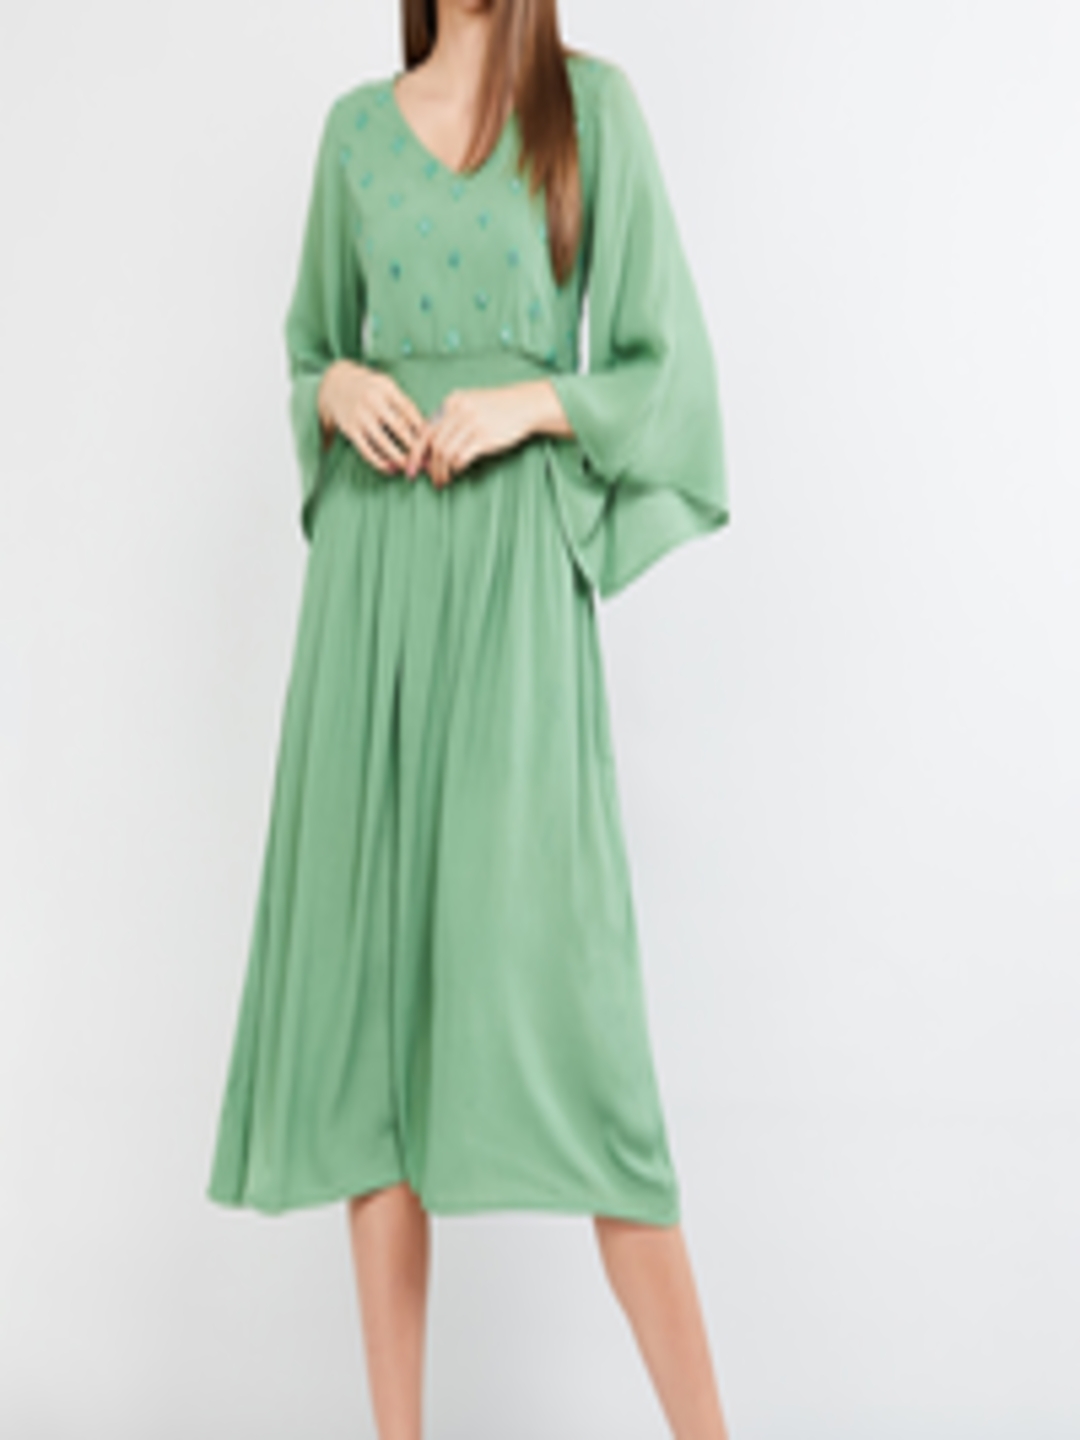 Buy Max Women Green Embellished A Line Dress - Ethnic Dresses for Women